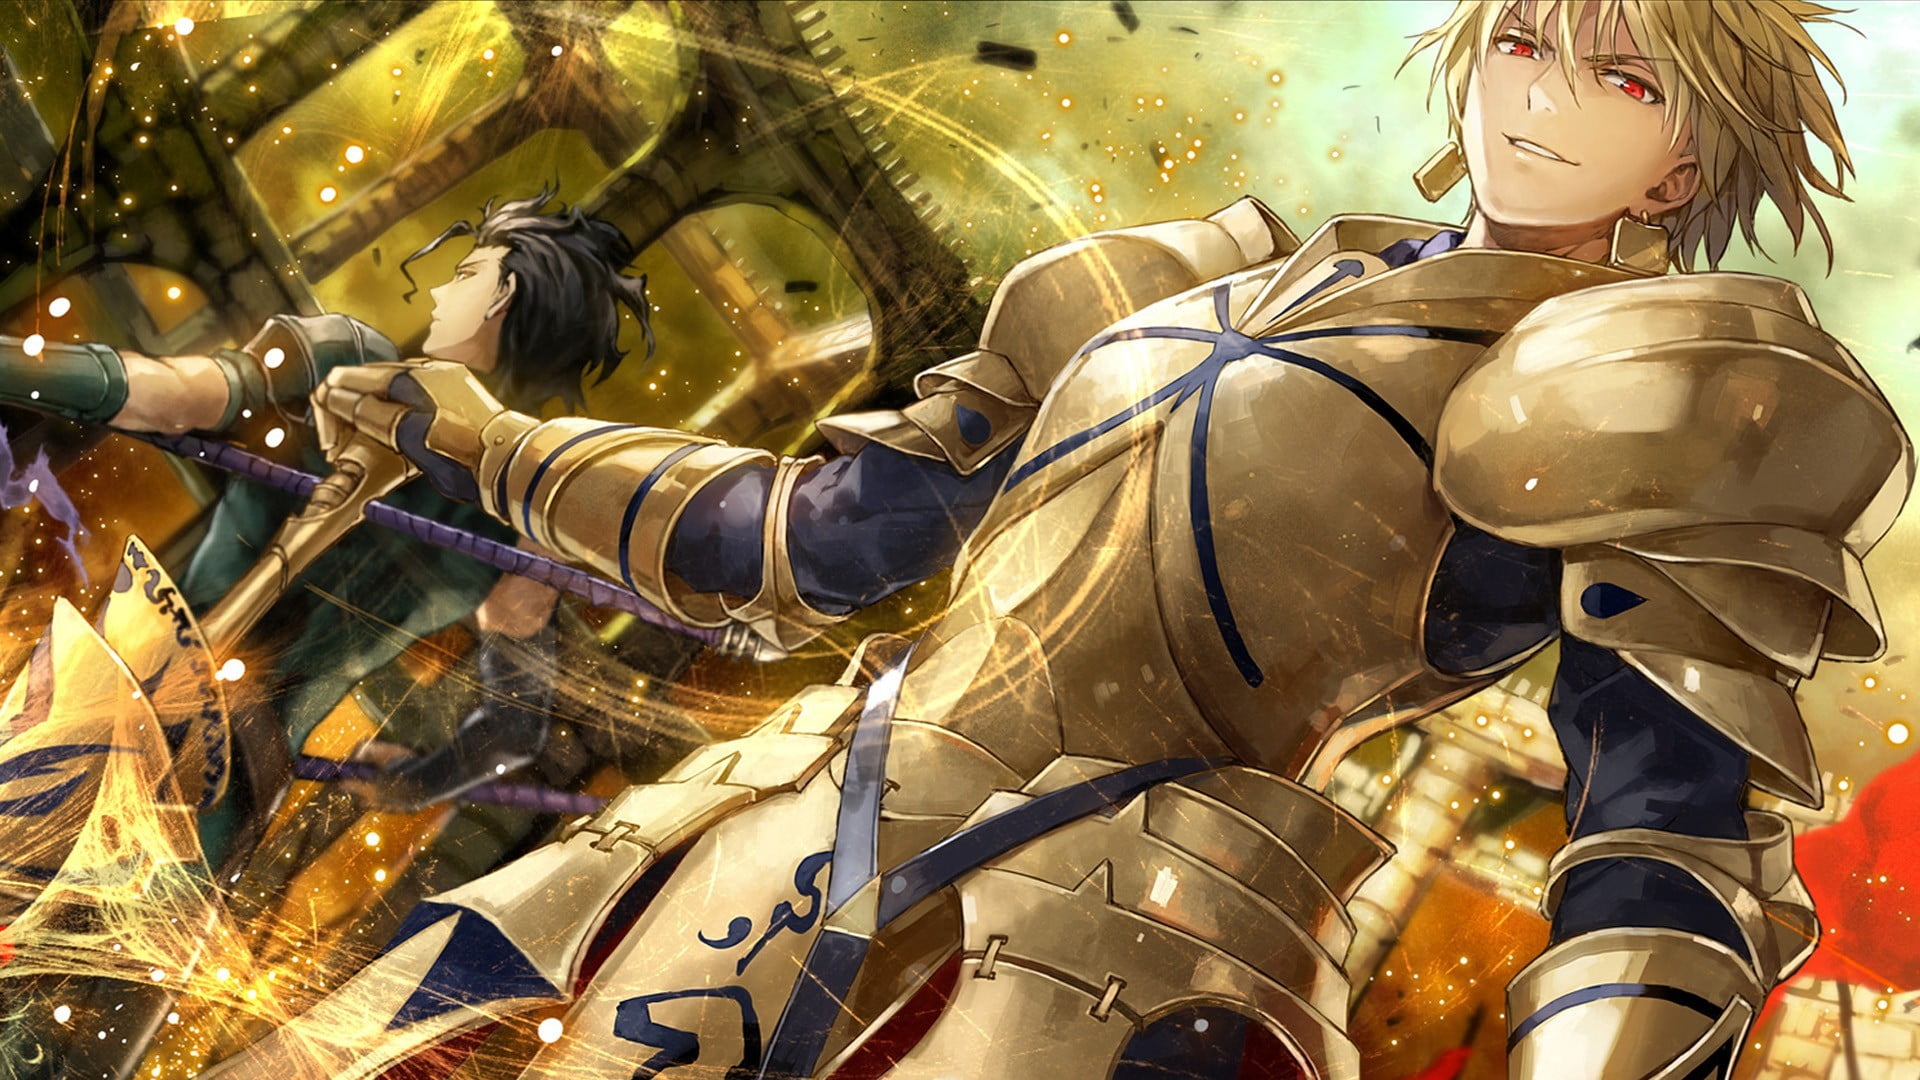 HD wallpaper male knight anime character Fantasy Warrior real people  front view  Wallpaper Flare